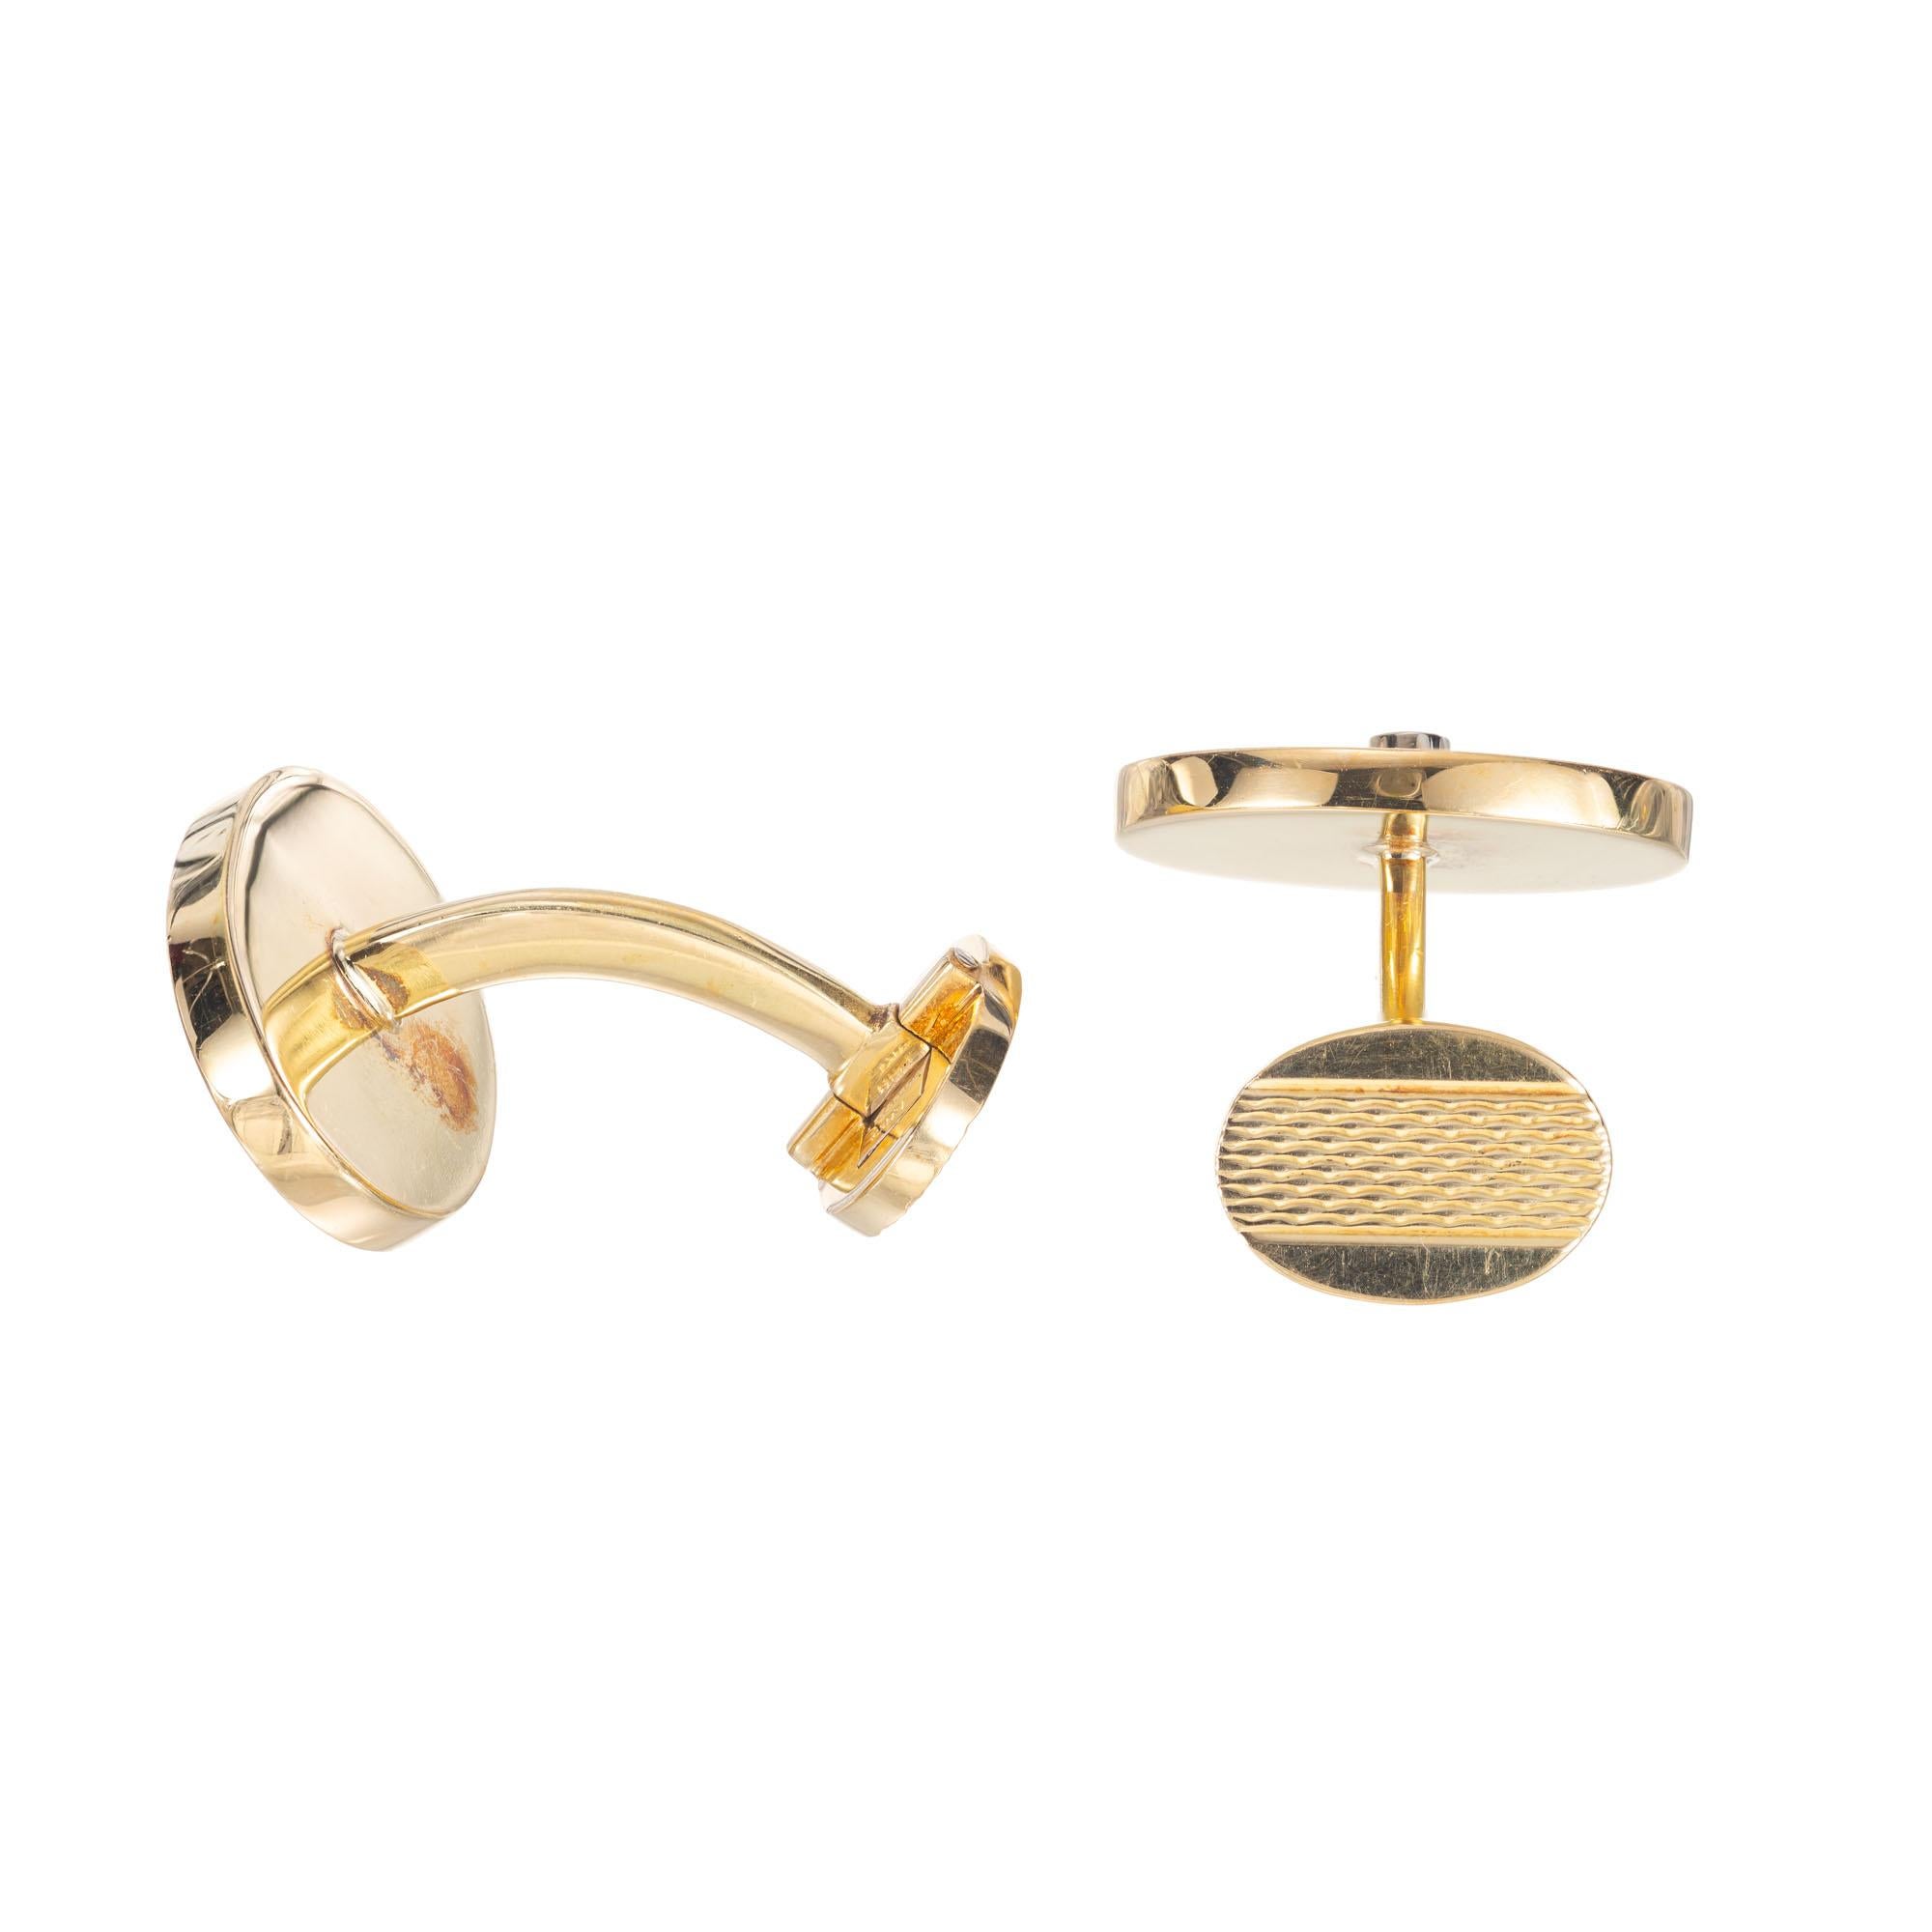 black and gold cuff links